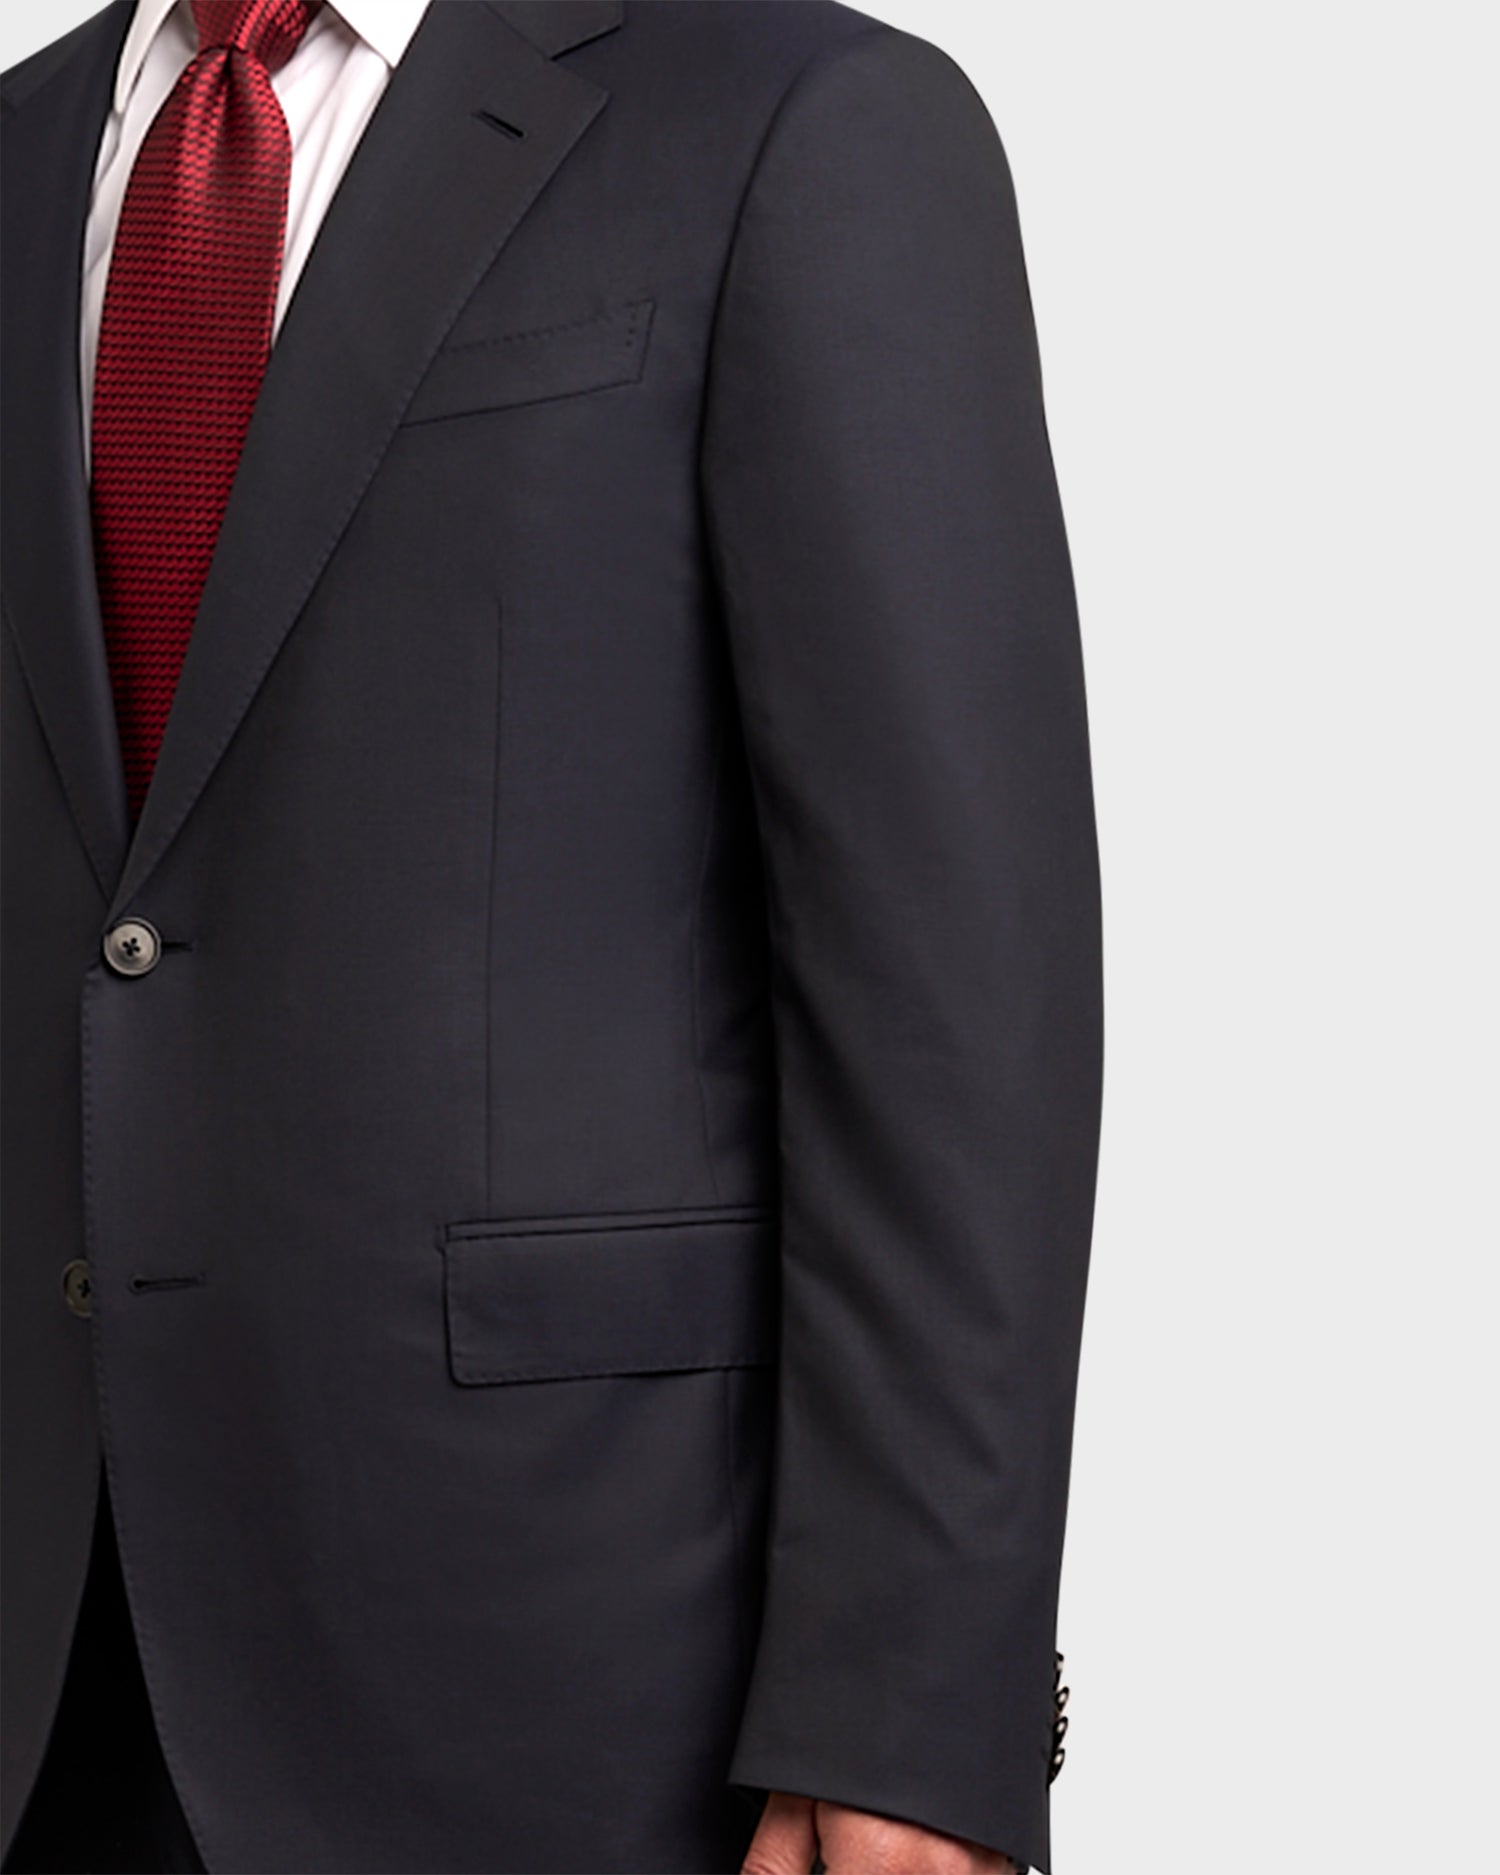 French Navy 15MILMIL15 Wool Tonal Microcheck Suit